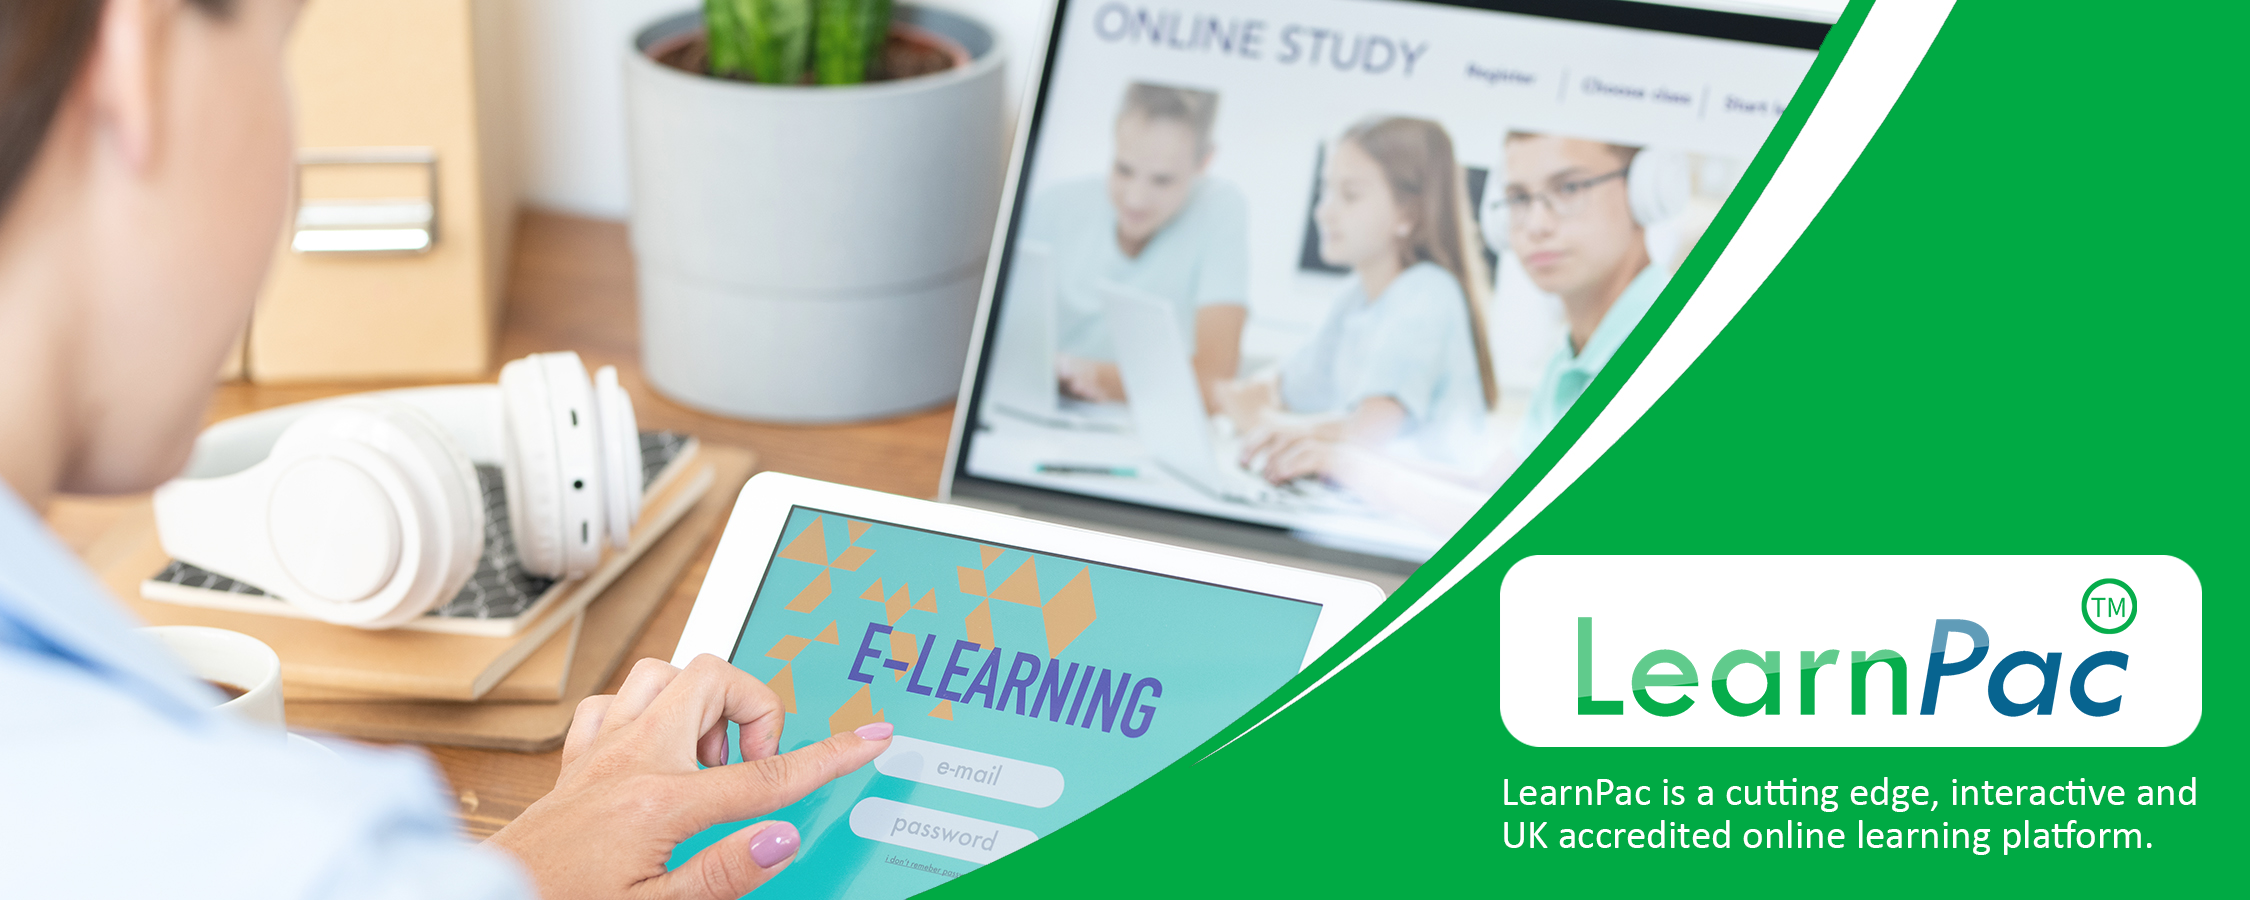 Care Planning and Record-Keeping - Online Learning Courses - E-Learning Courses - LearnPac Systems UK -